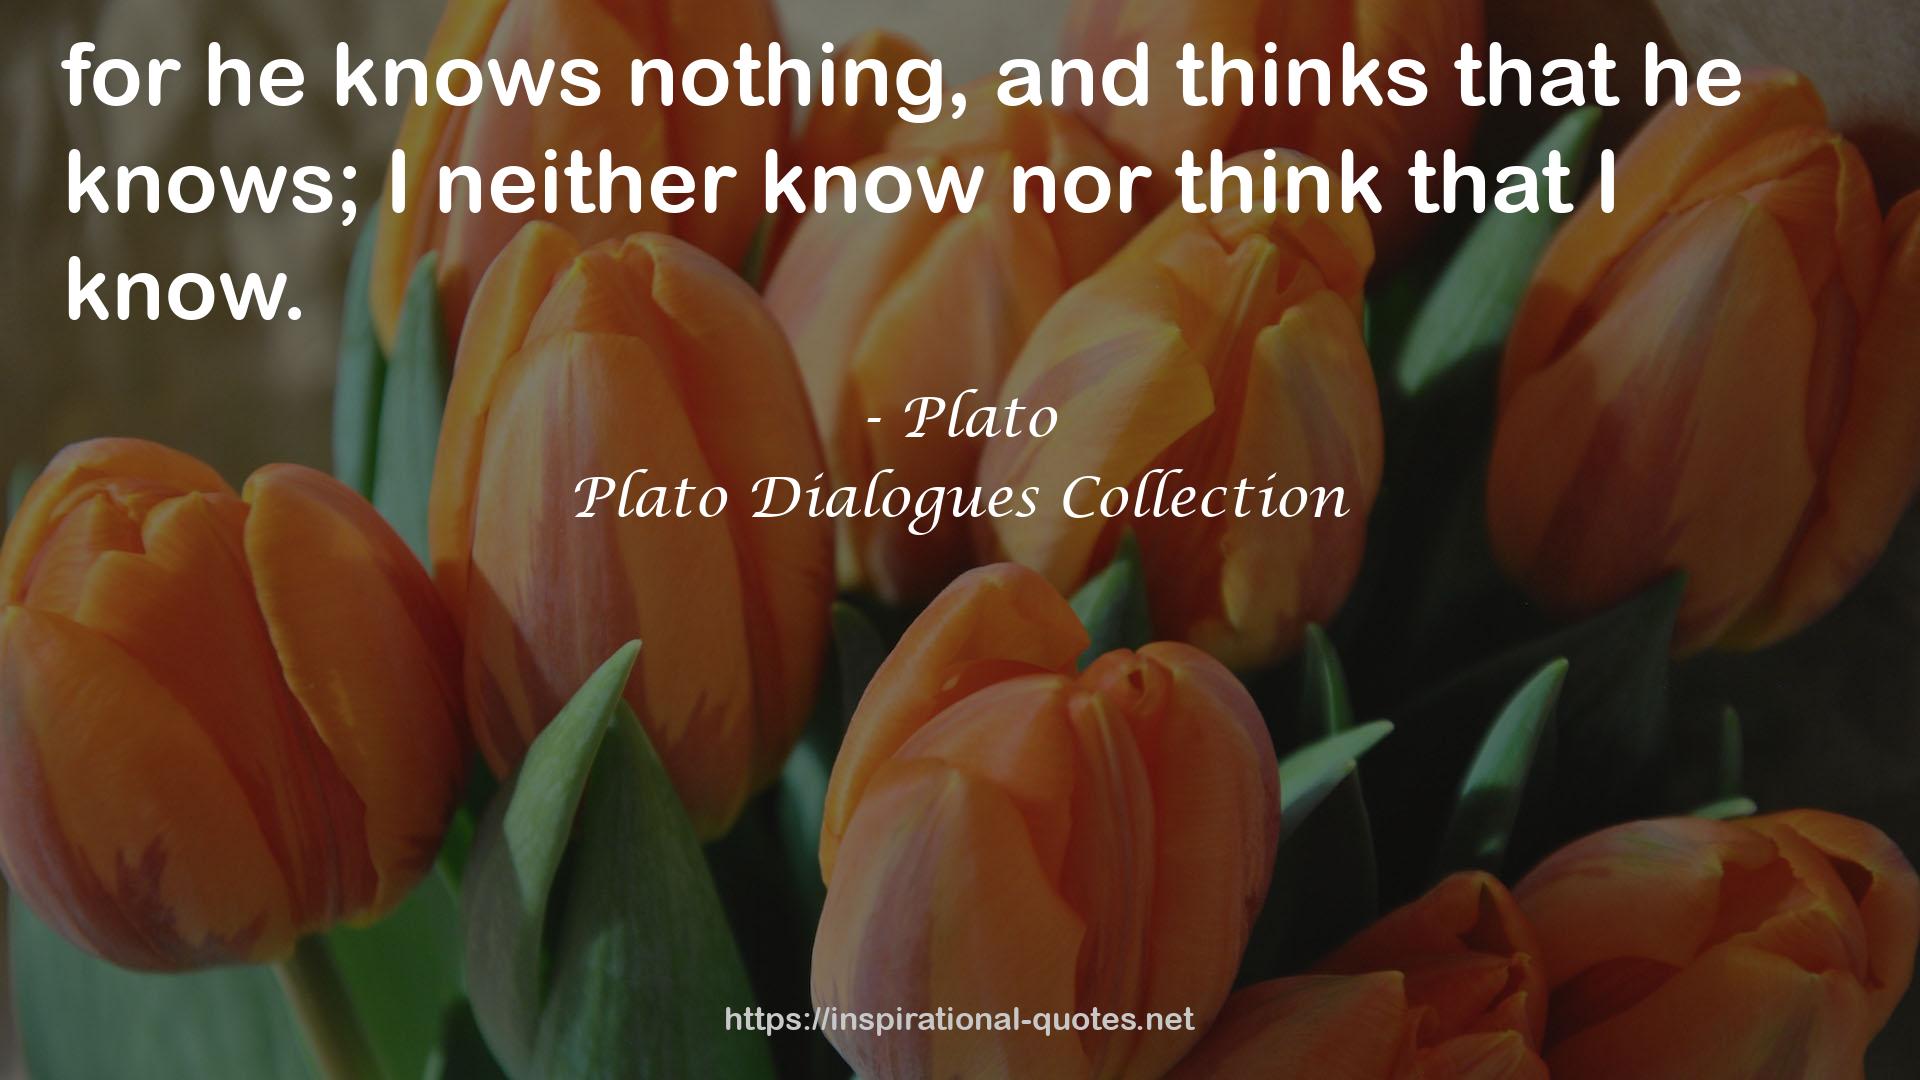 Plato Dialogues Collection QUOTES